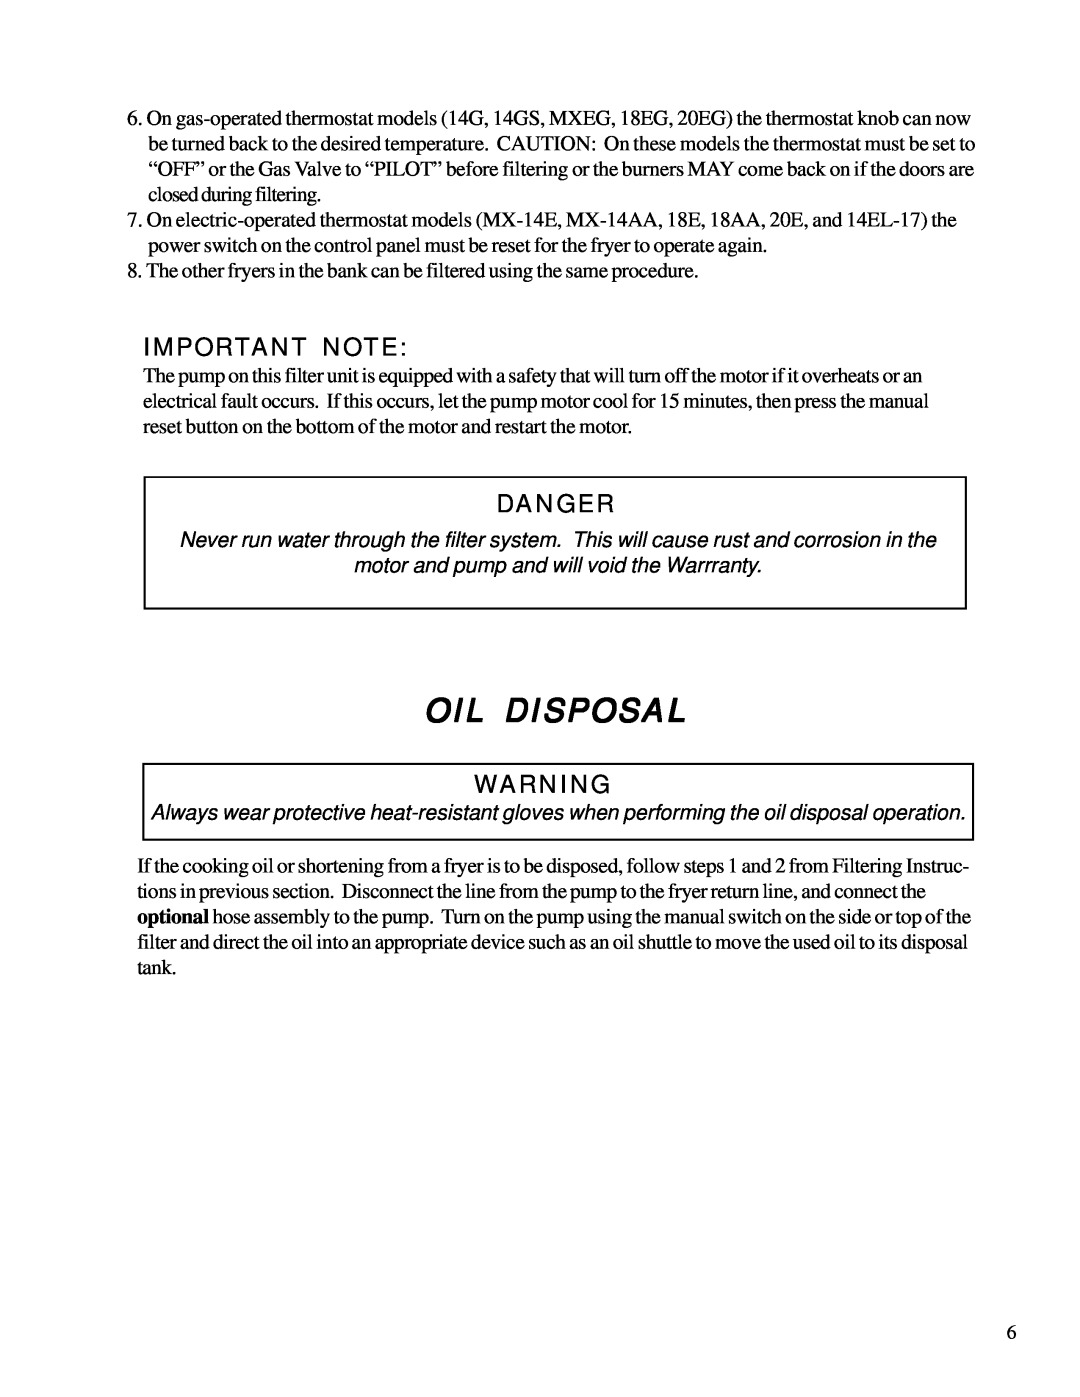 Anetsberger Brothers FM-14 warranty Oil Disposal, Important Note, Danger 